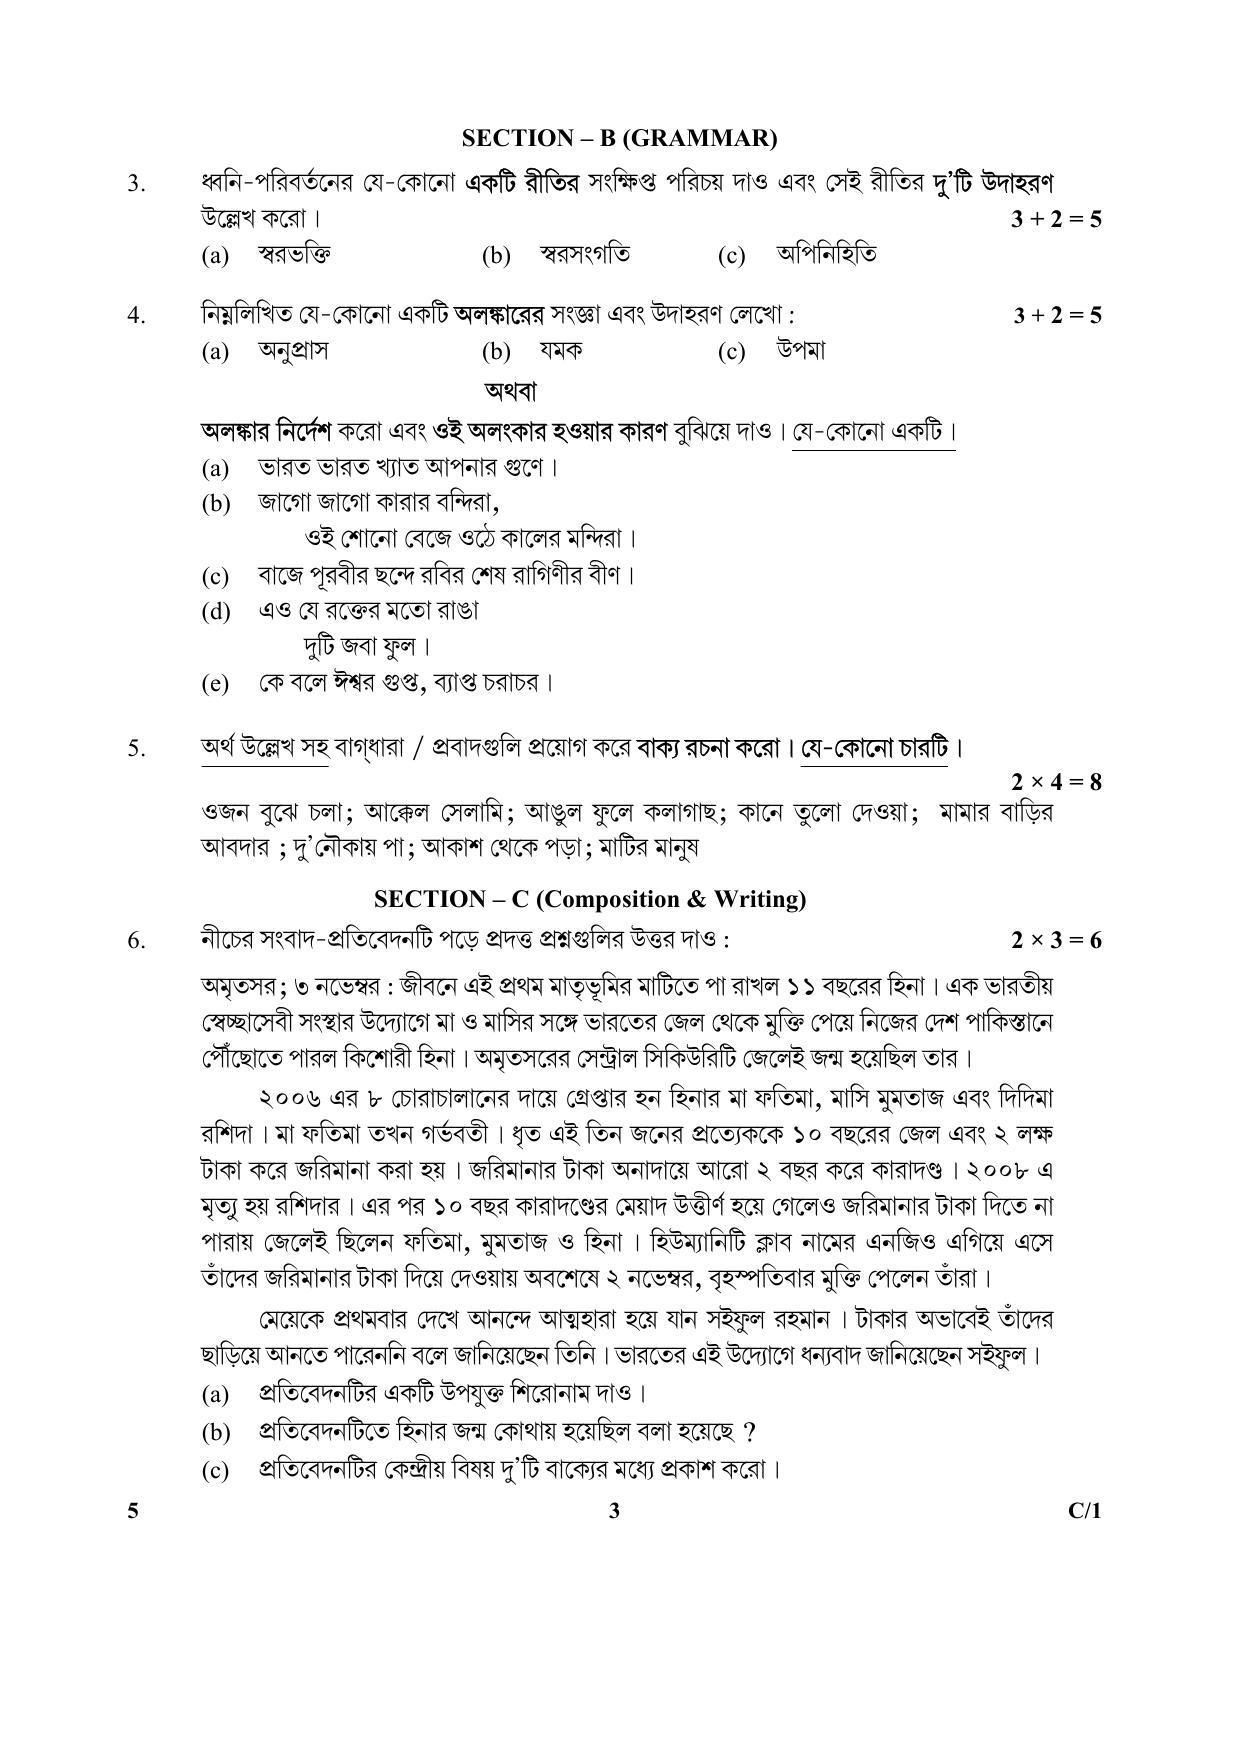 CBSE Class 12 5 (Bengali) 2018 Compartment Question Paper - Page 3